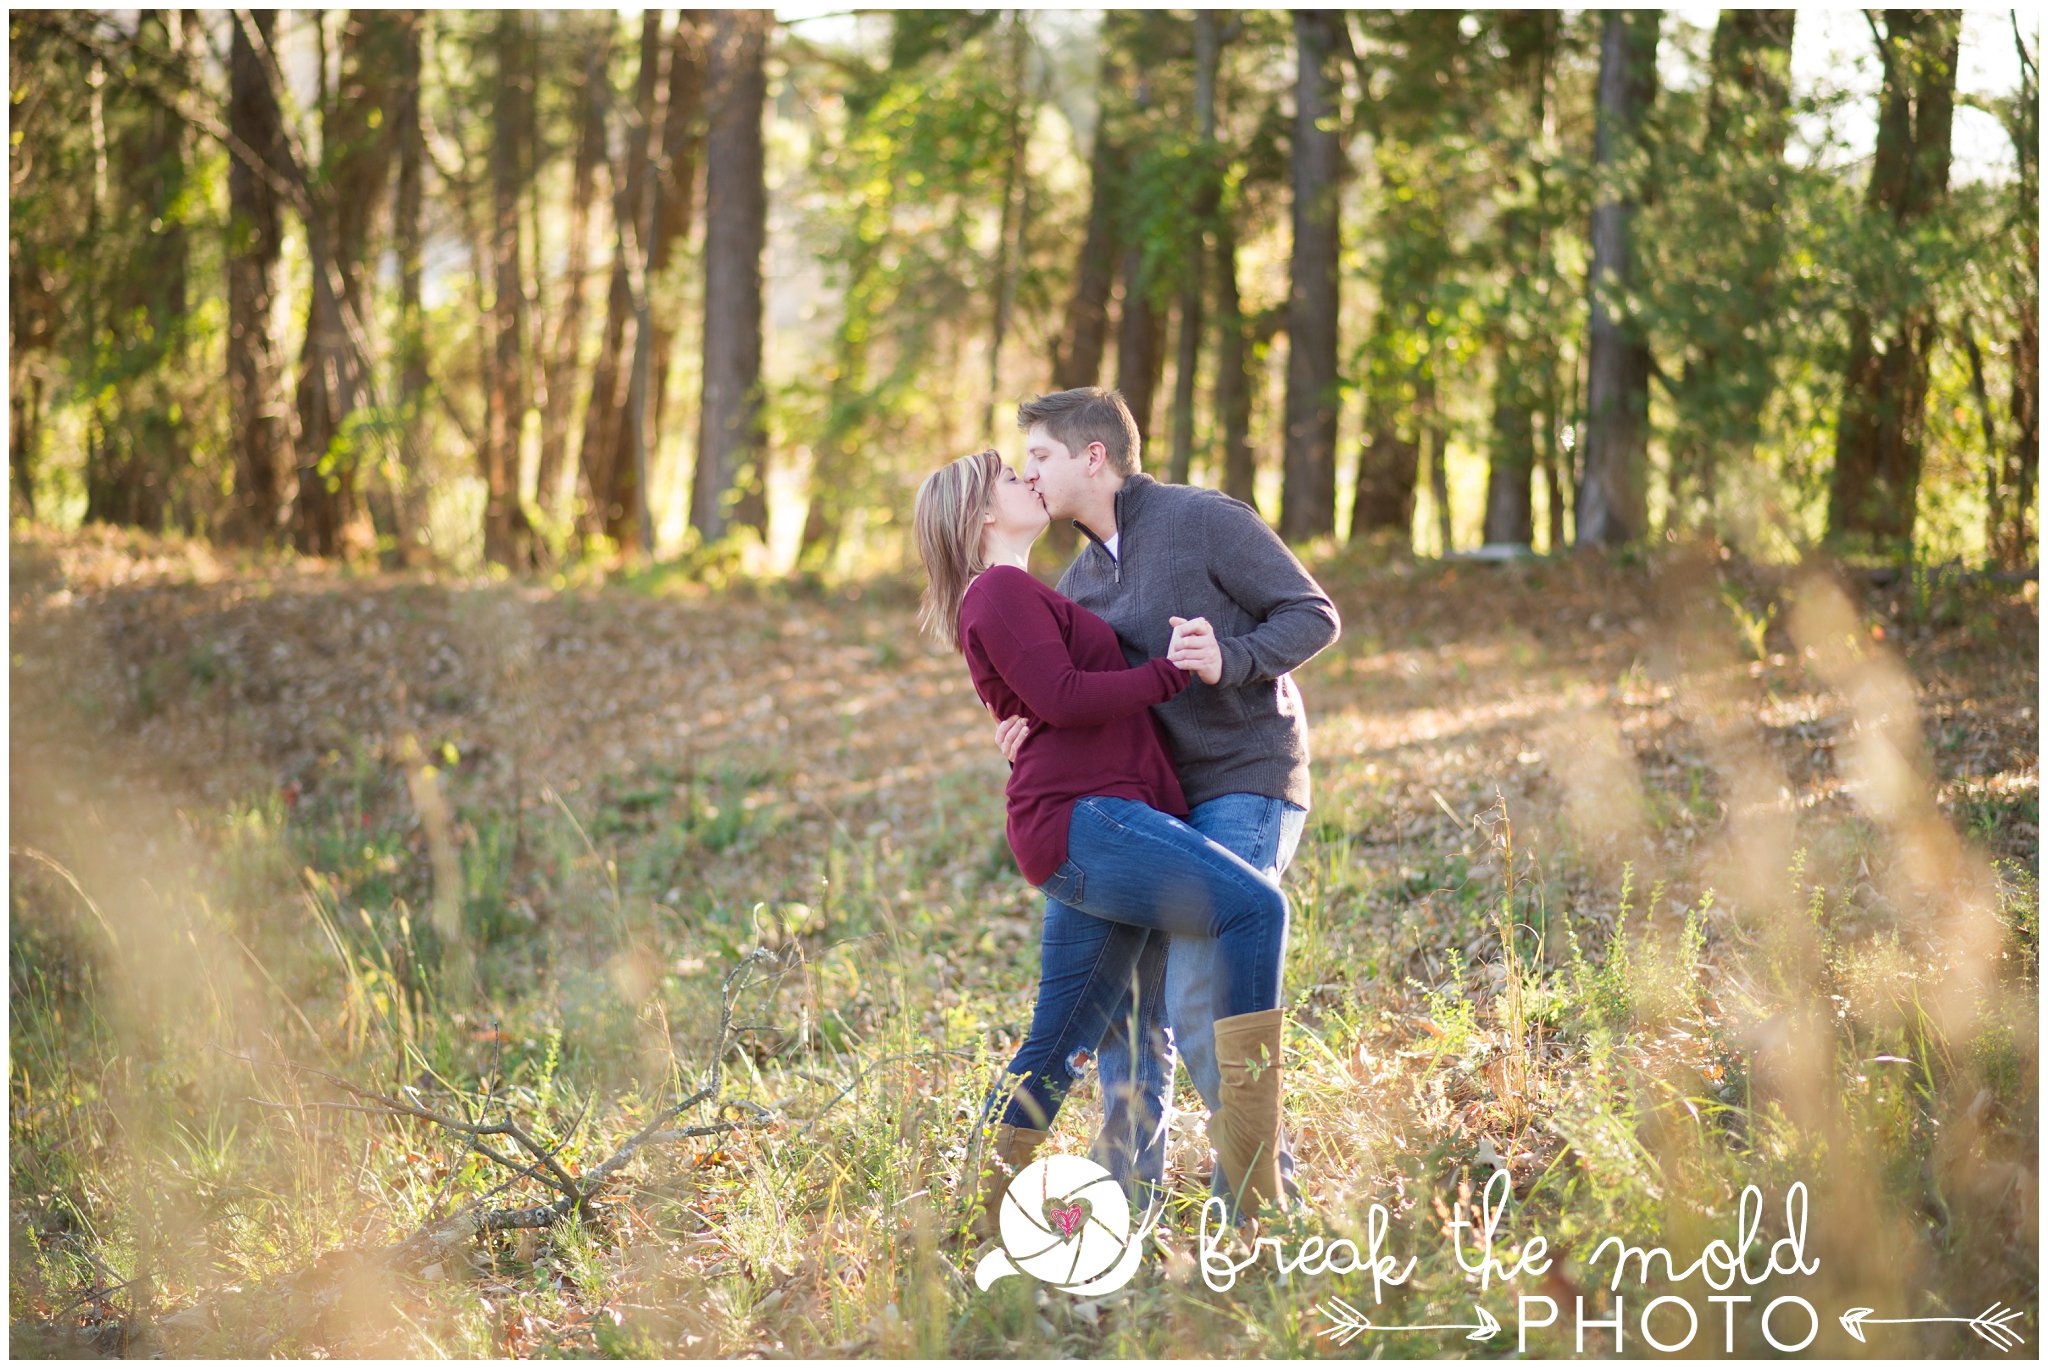 break-the-mold-photo-field-country-engagement-winter-shoot_6636.jpg